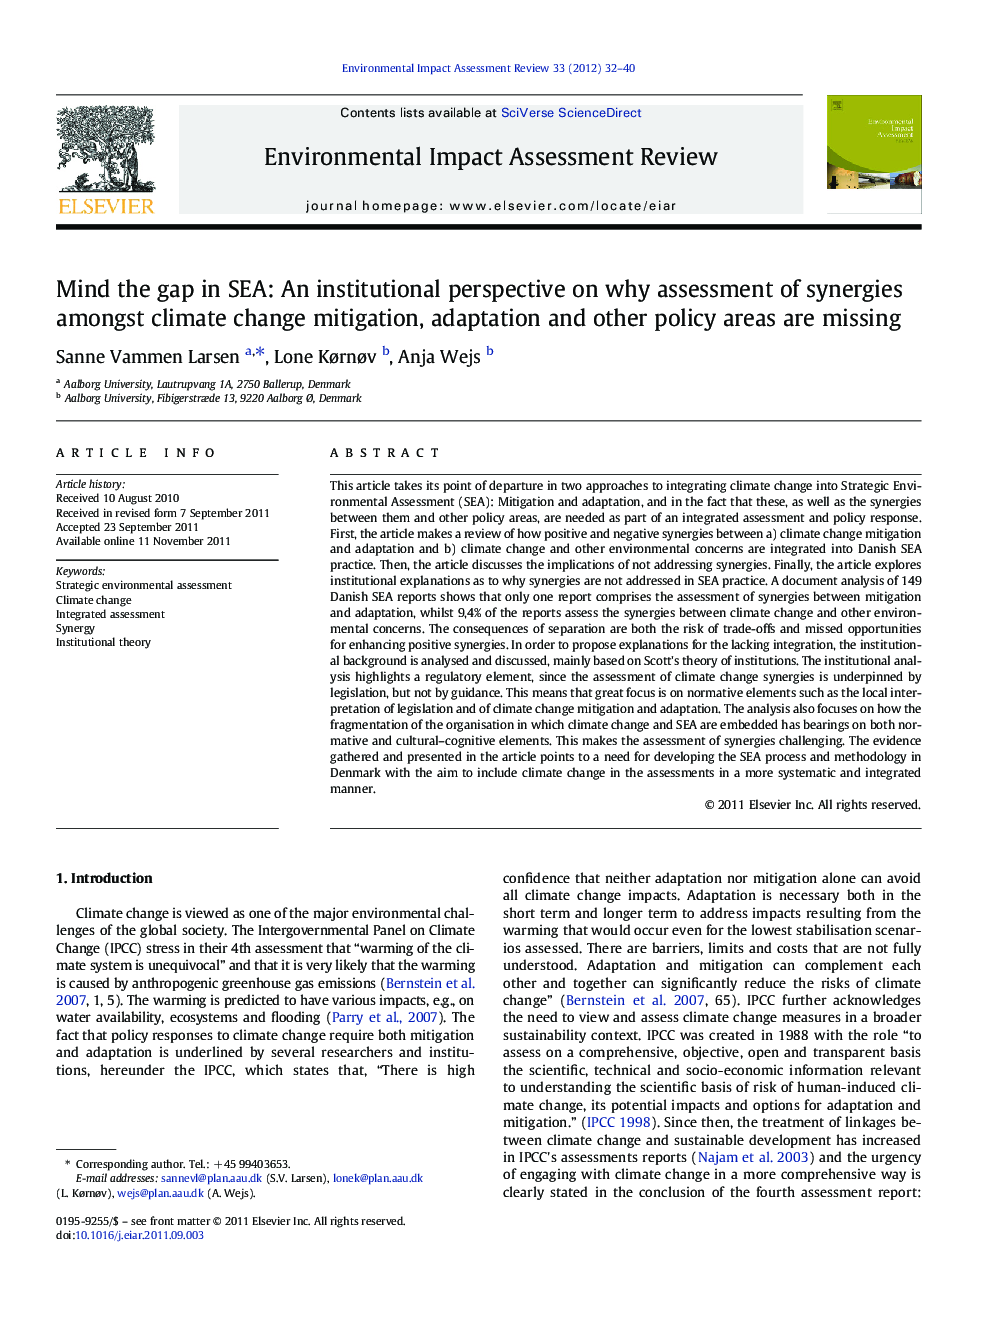 Mind the gap in SEA: An institutional perspective on why assessment of synergies amongst climate change mitigation, adaptation and other policy areas are missing